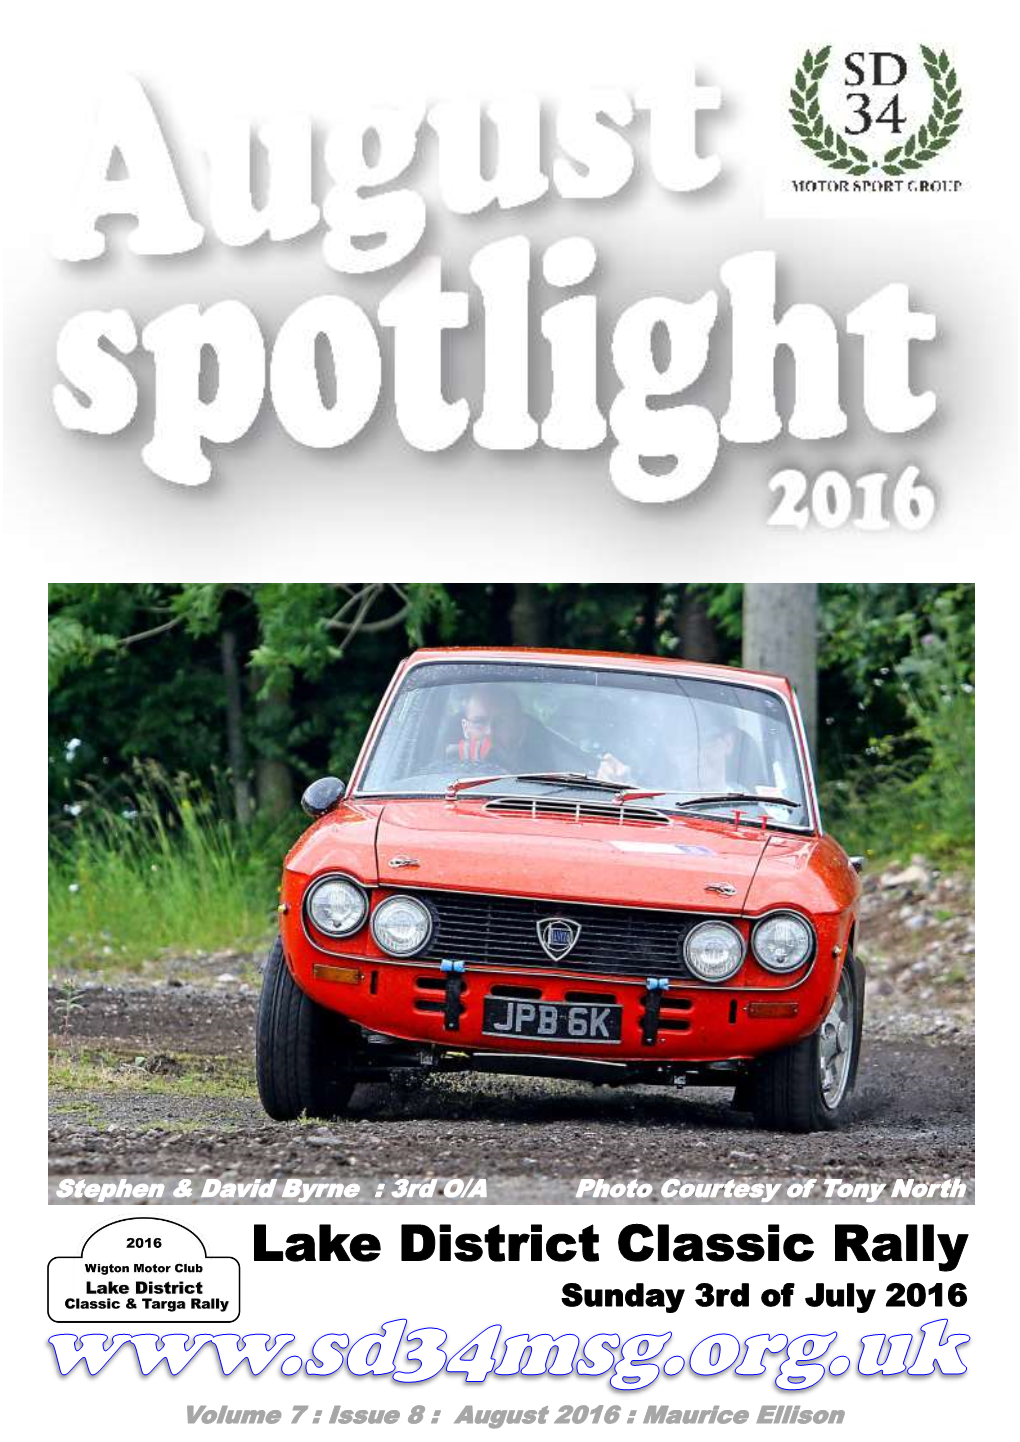 Lake District Classic Rally Sunday 3Rd of July 2016